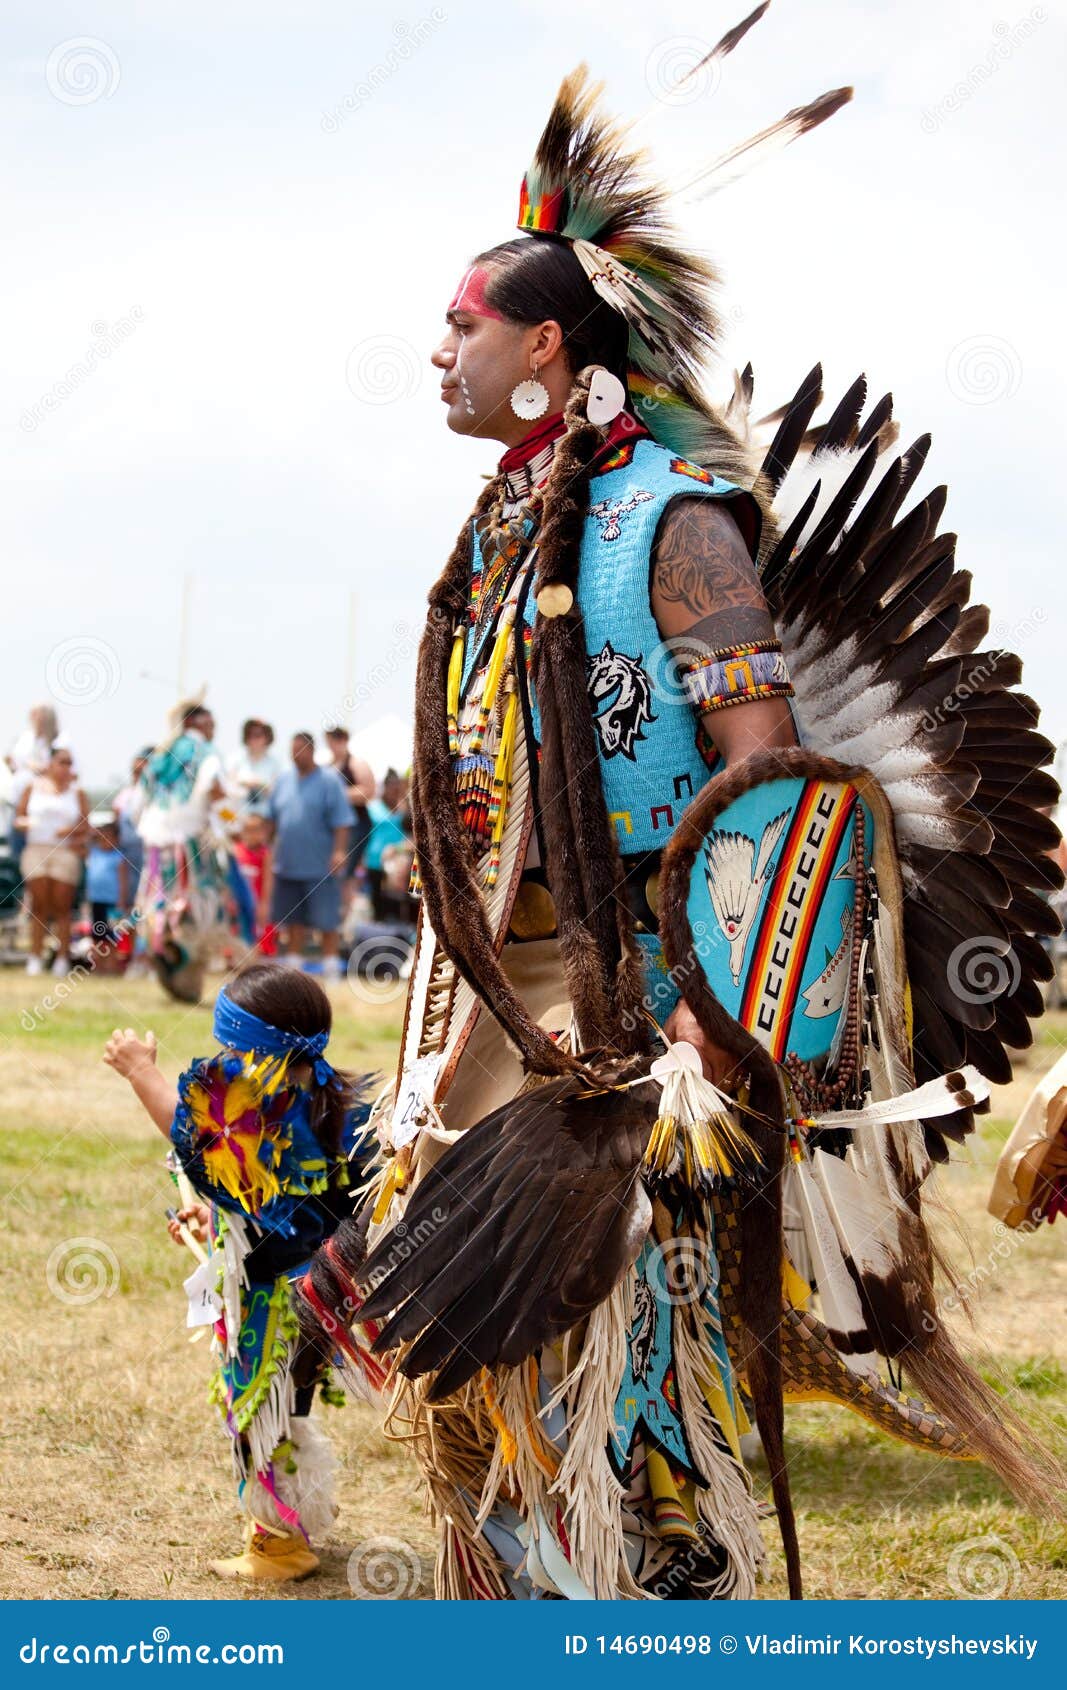 North American Indian Editorial Stock Photo - Image: 14690498